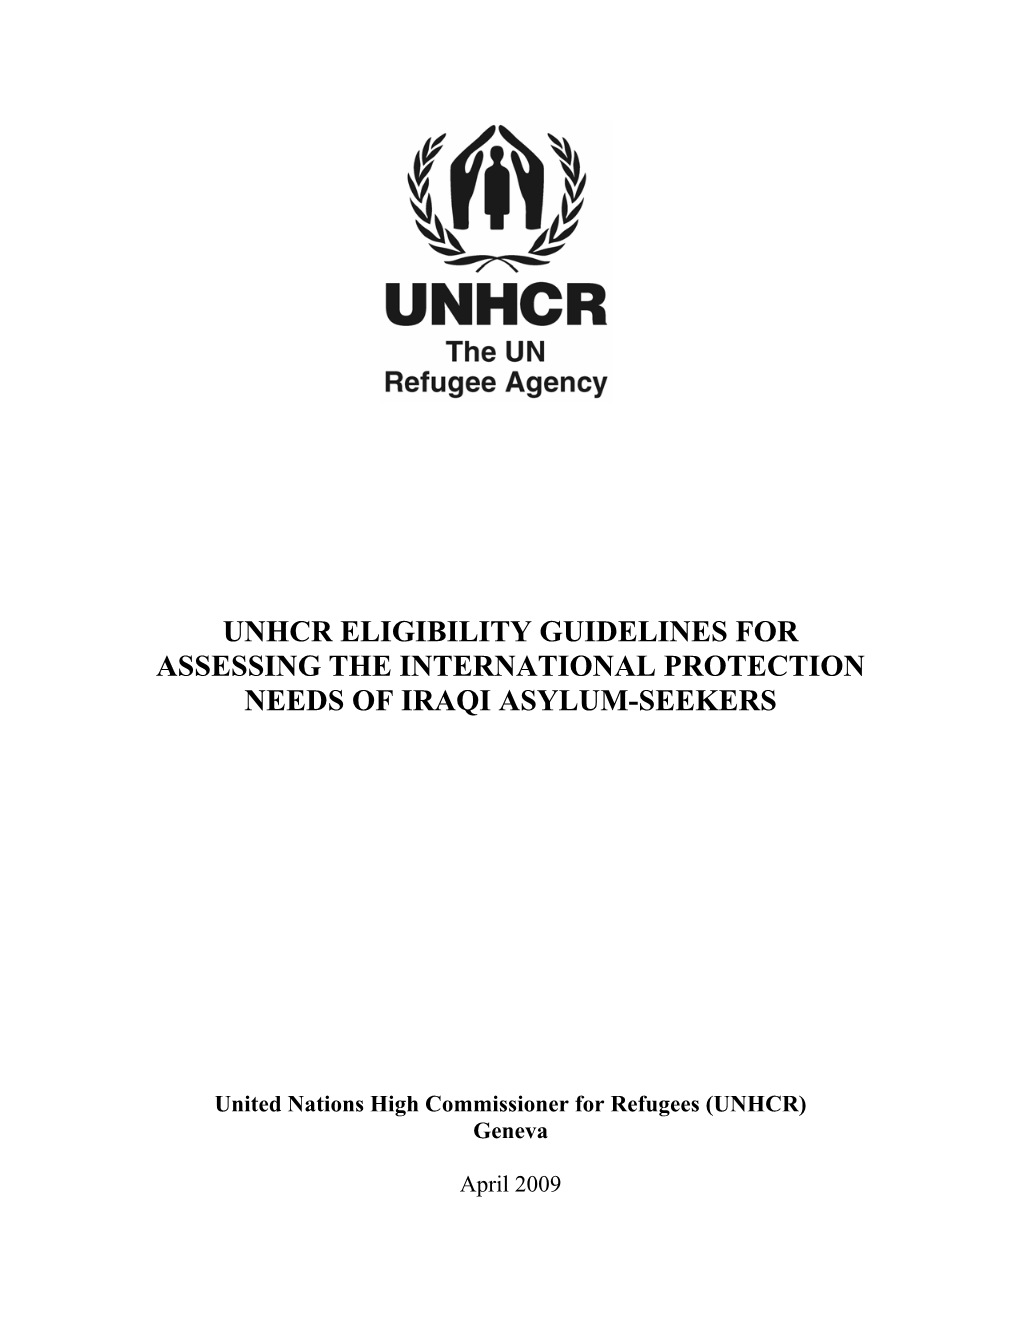 Unhcr Eligibility Guidelines for Assessing the International Protection Needs of Iraqi Asylum-Seekers